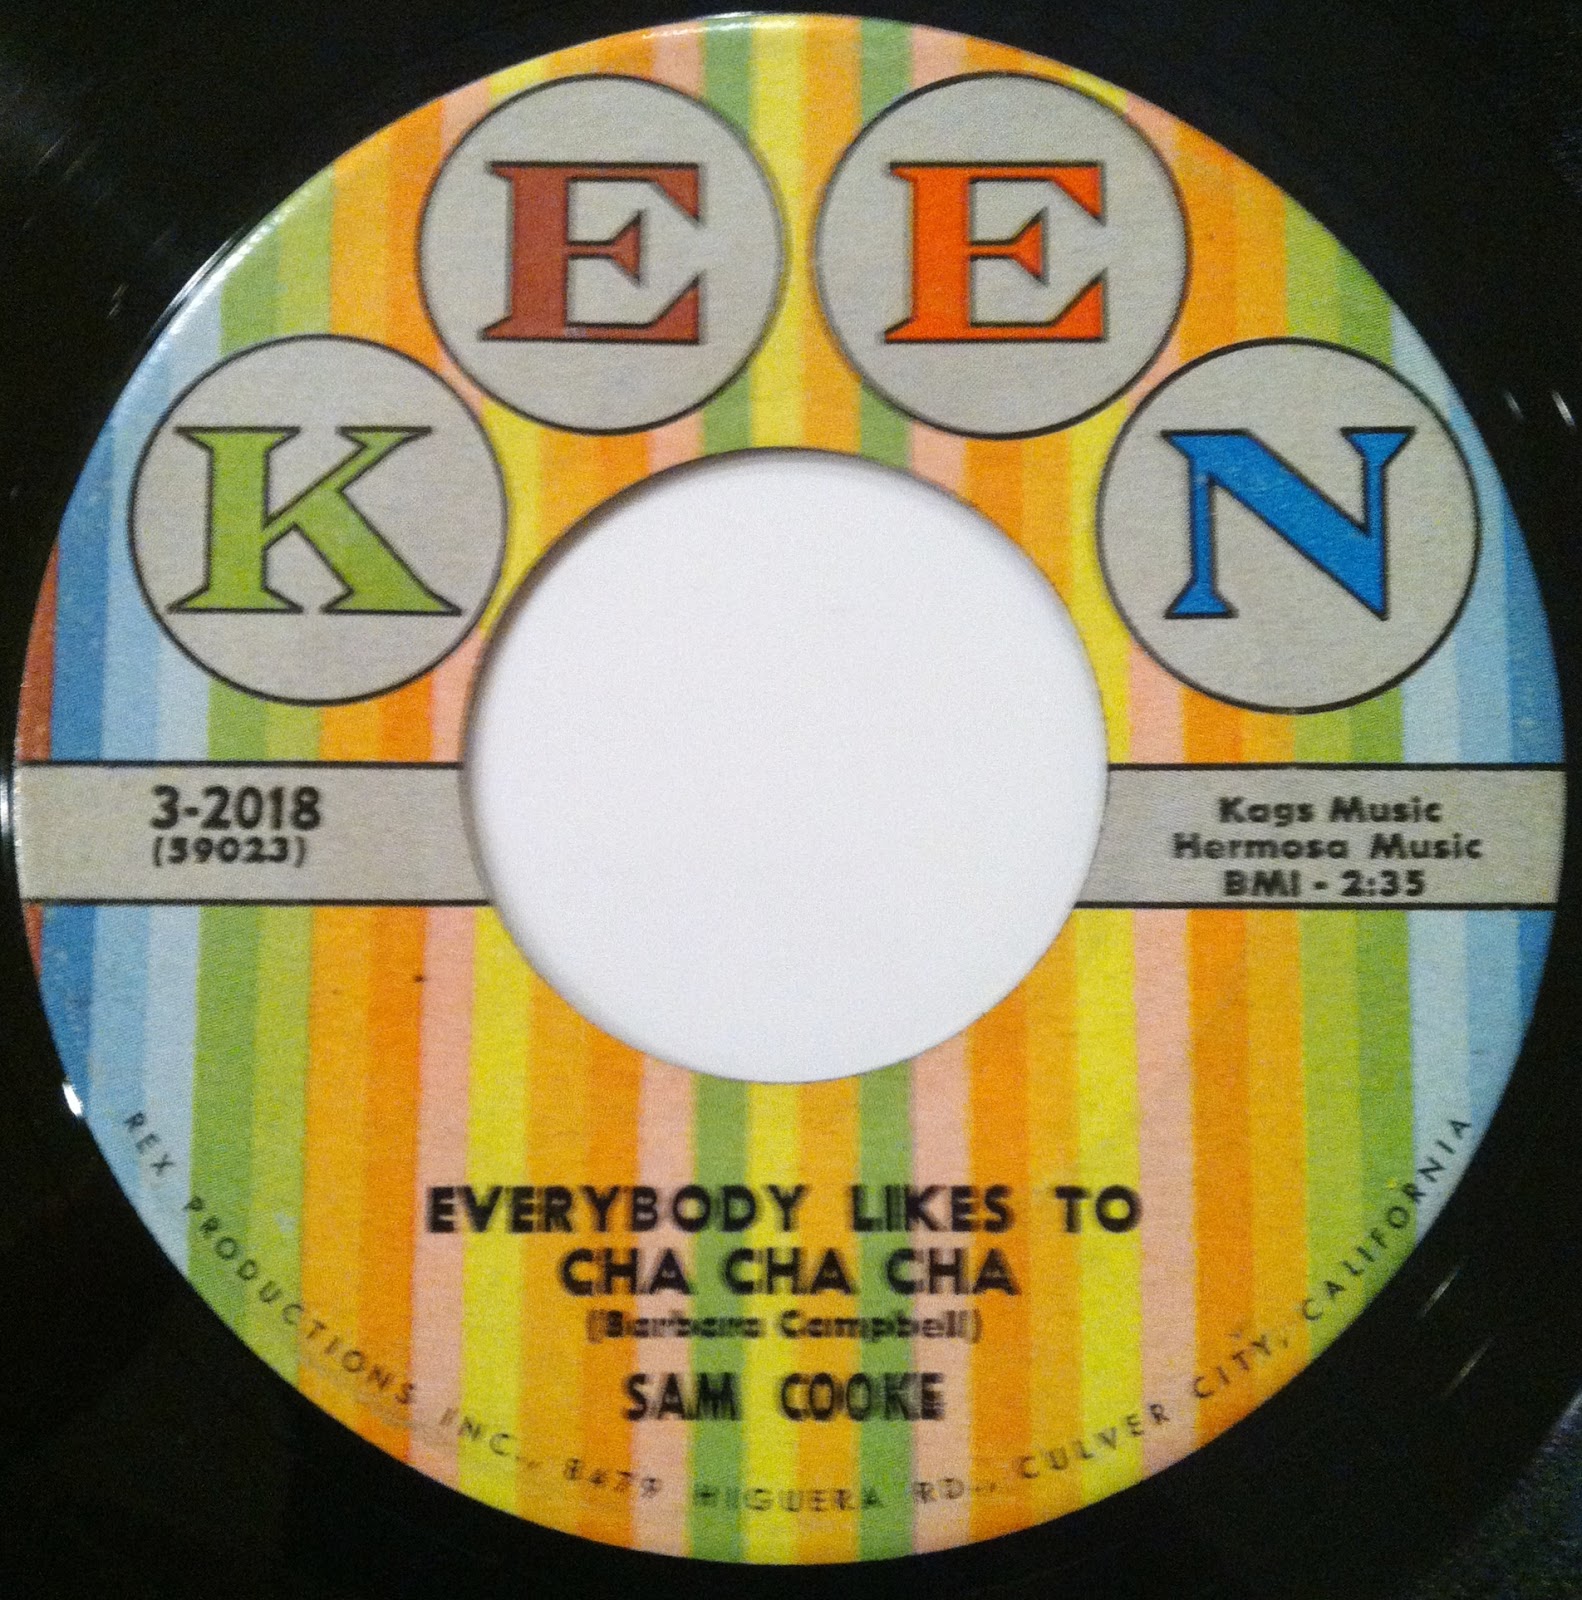 Sam Cooke - the keen records story CD Covers. Sam Cooke - the complete keen years CD Covers. Everyone likes her